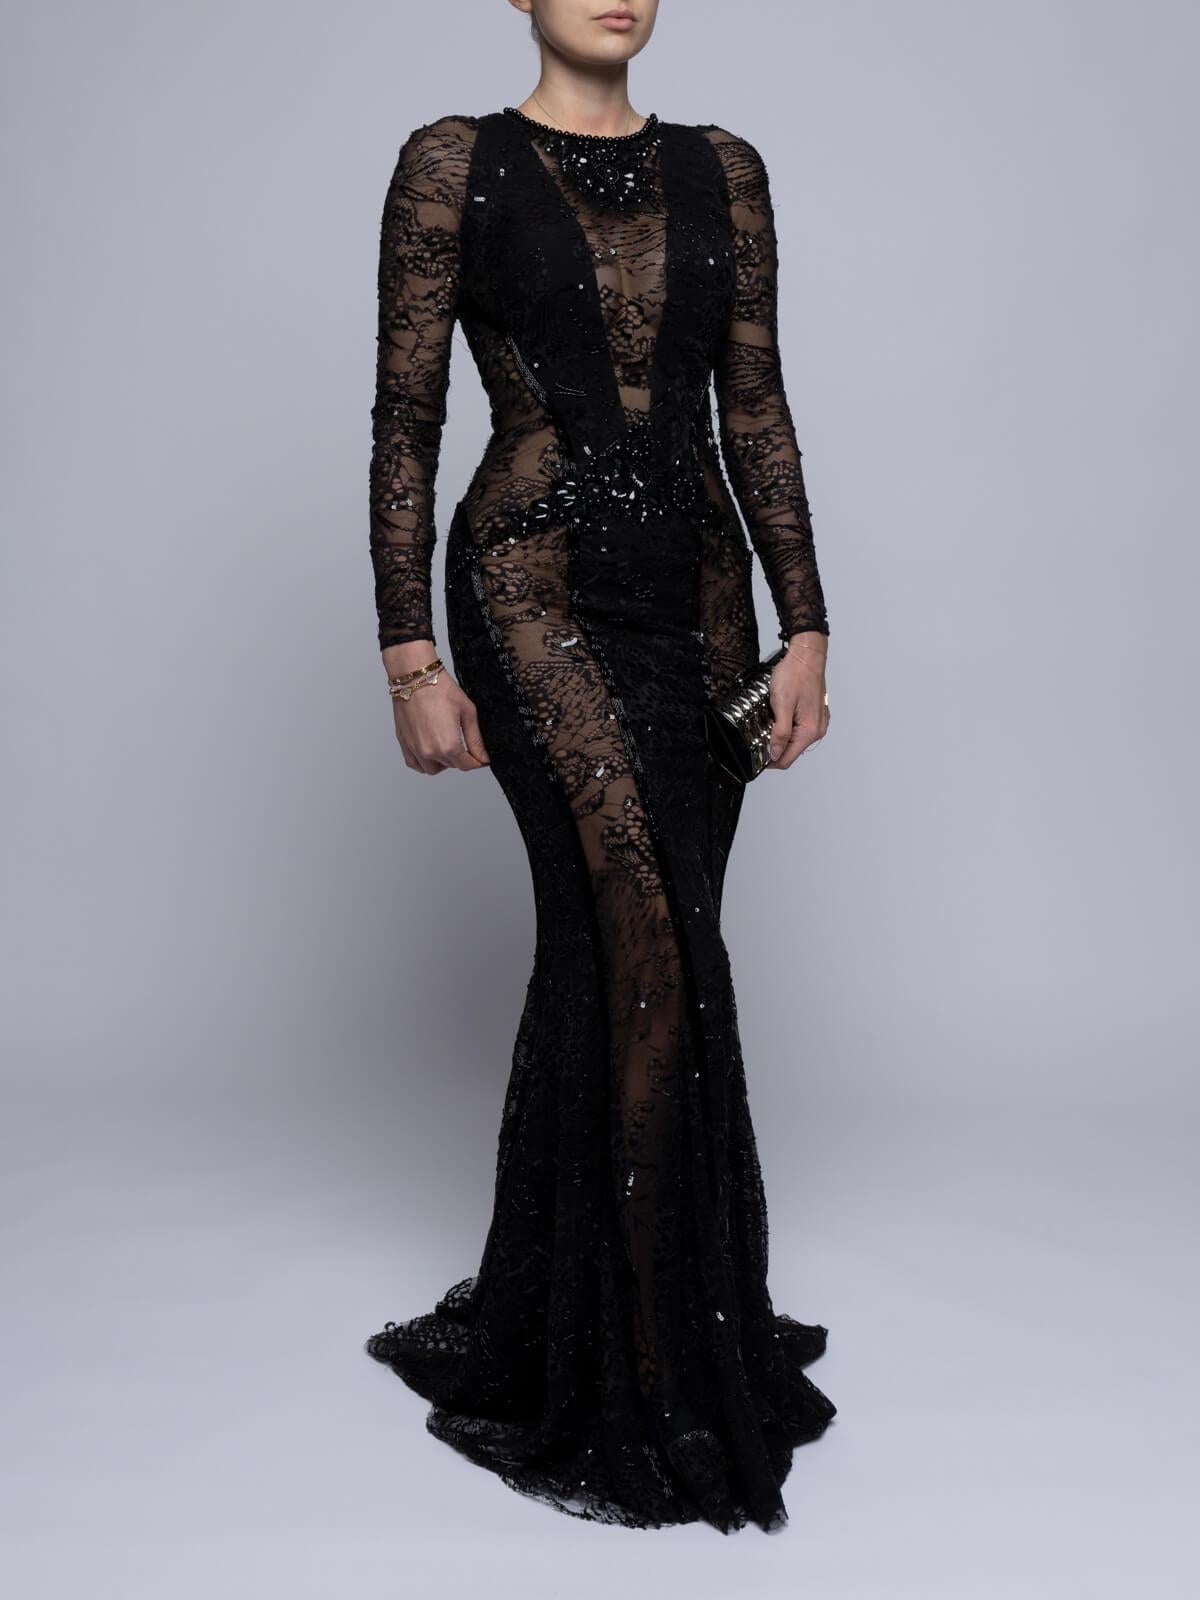 CONDITION Very good. Minor loose threads and wear evident on the lace. Minor wear on the embellishments. Minor stains on interior. Details Black Bodycon Zip closure Embroidered Made in Lebanon Composition 50% Silk, 50% Polyamide Fitting Information